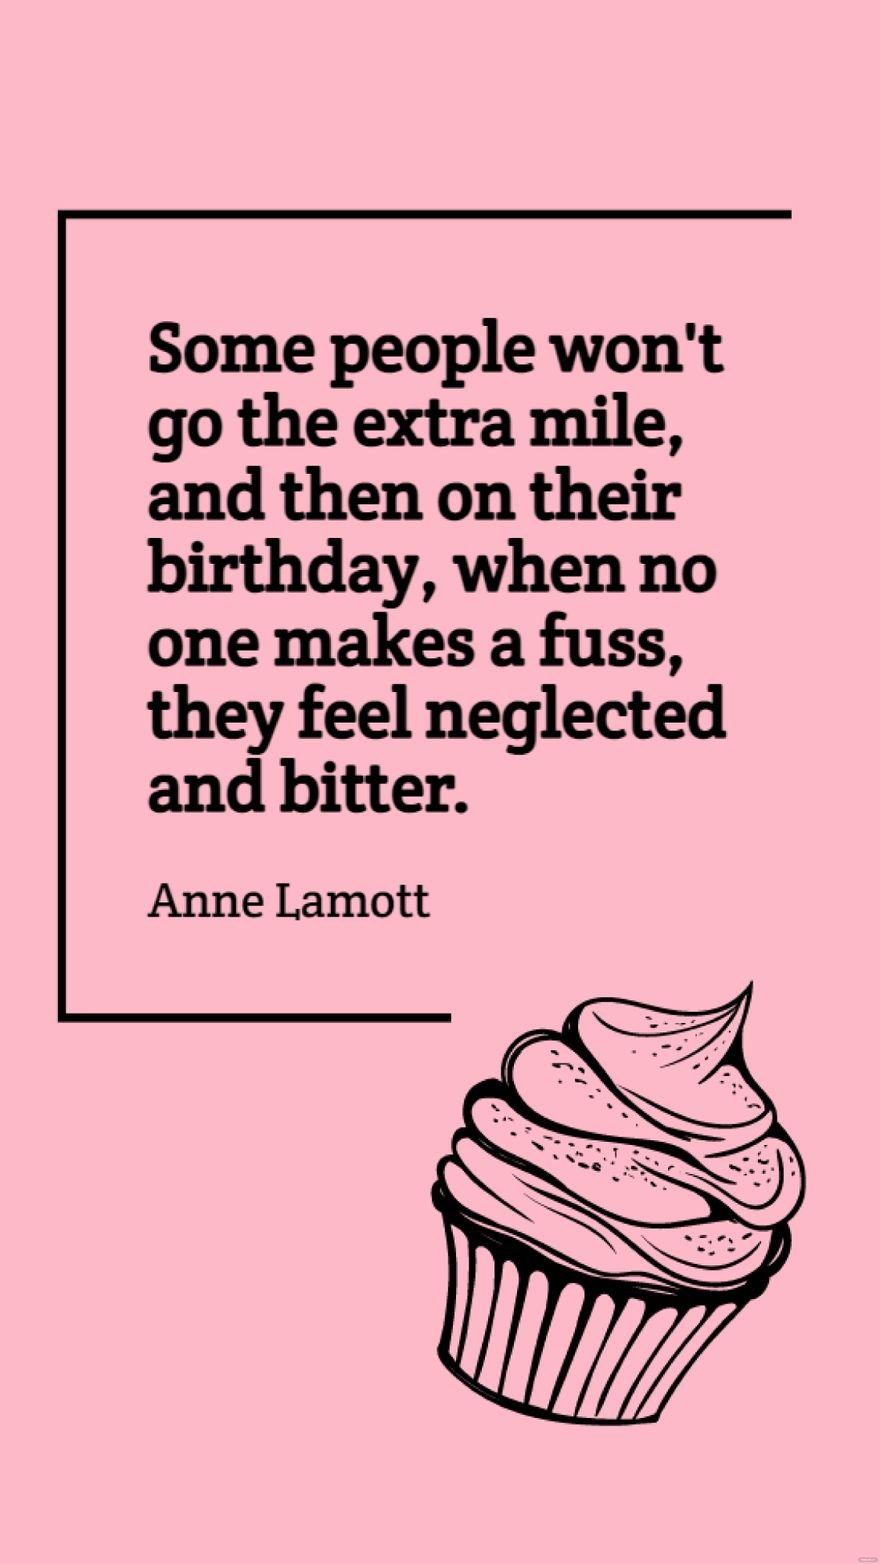  Anne Lamott - Some people won't go the extra mile, and then on their birthday, when no one makes a fuss, they feel neglected and bitter.